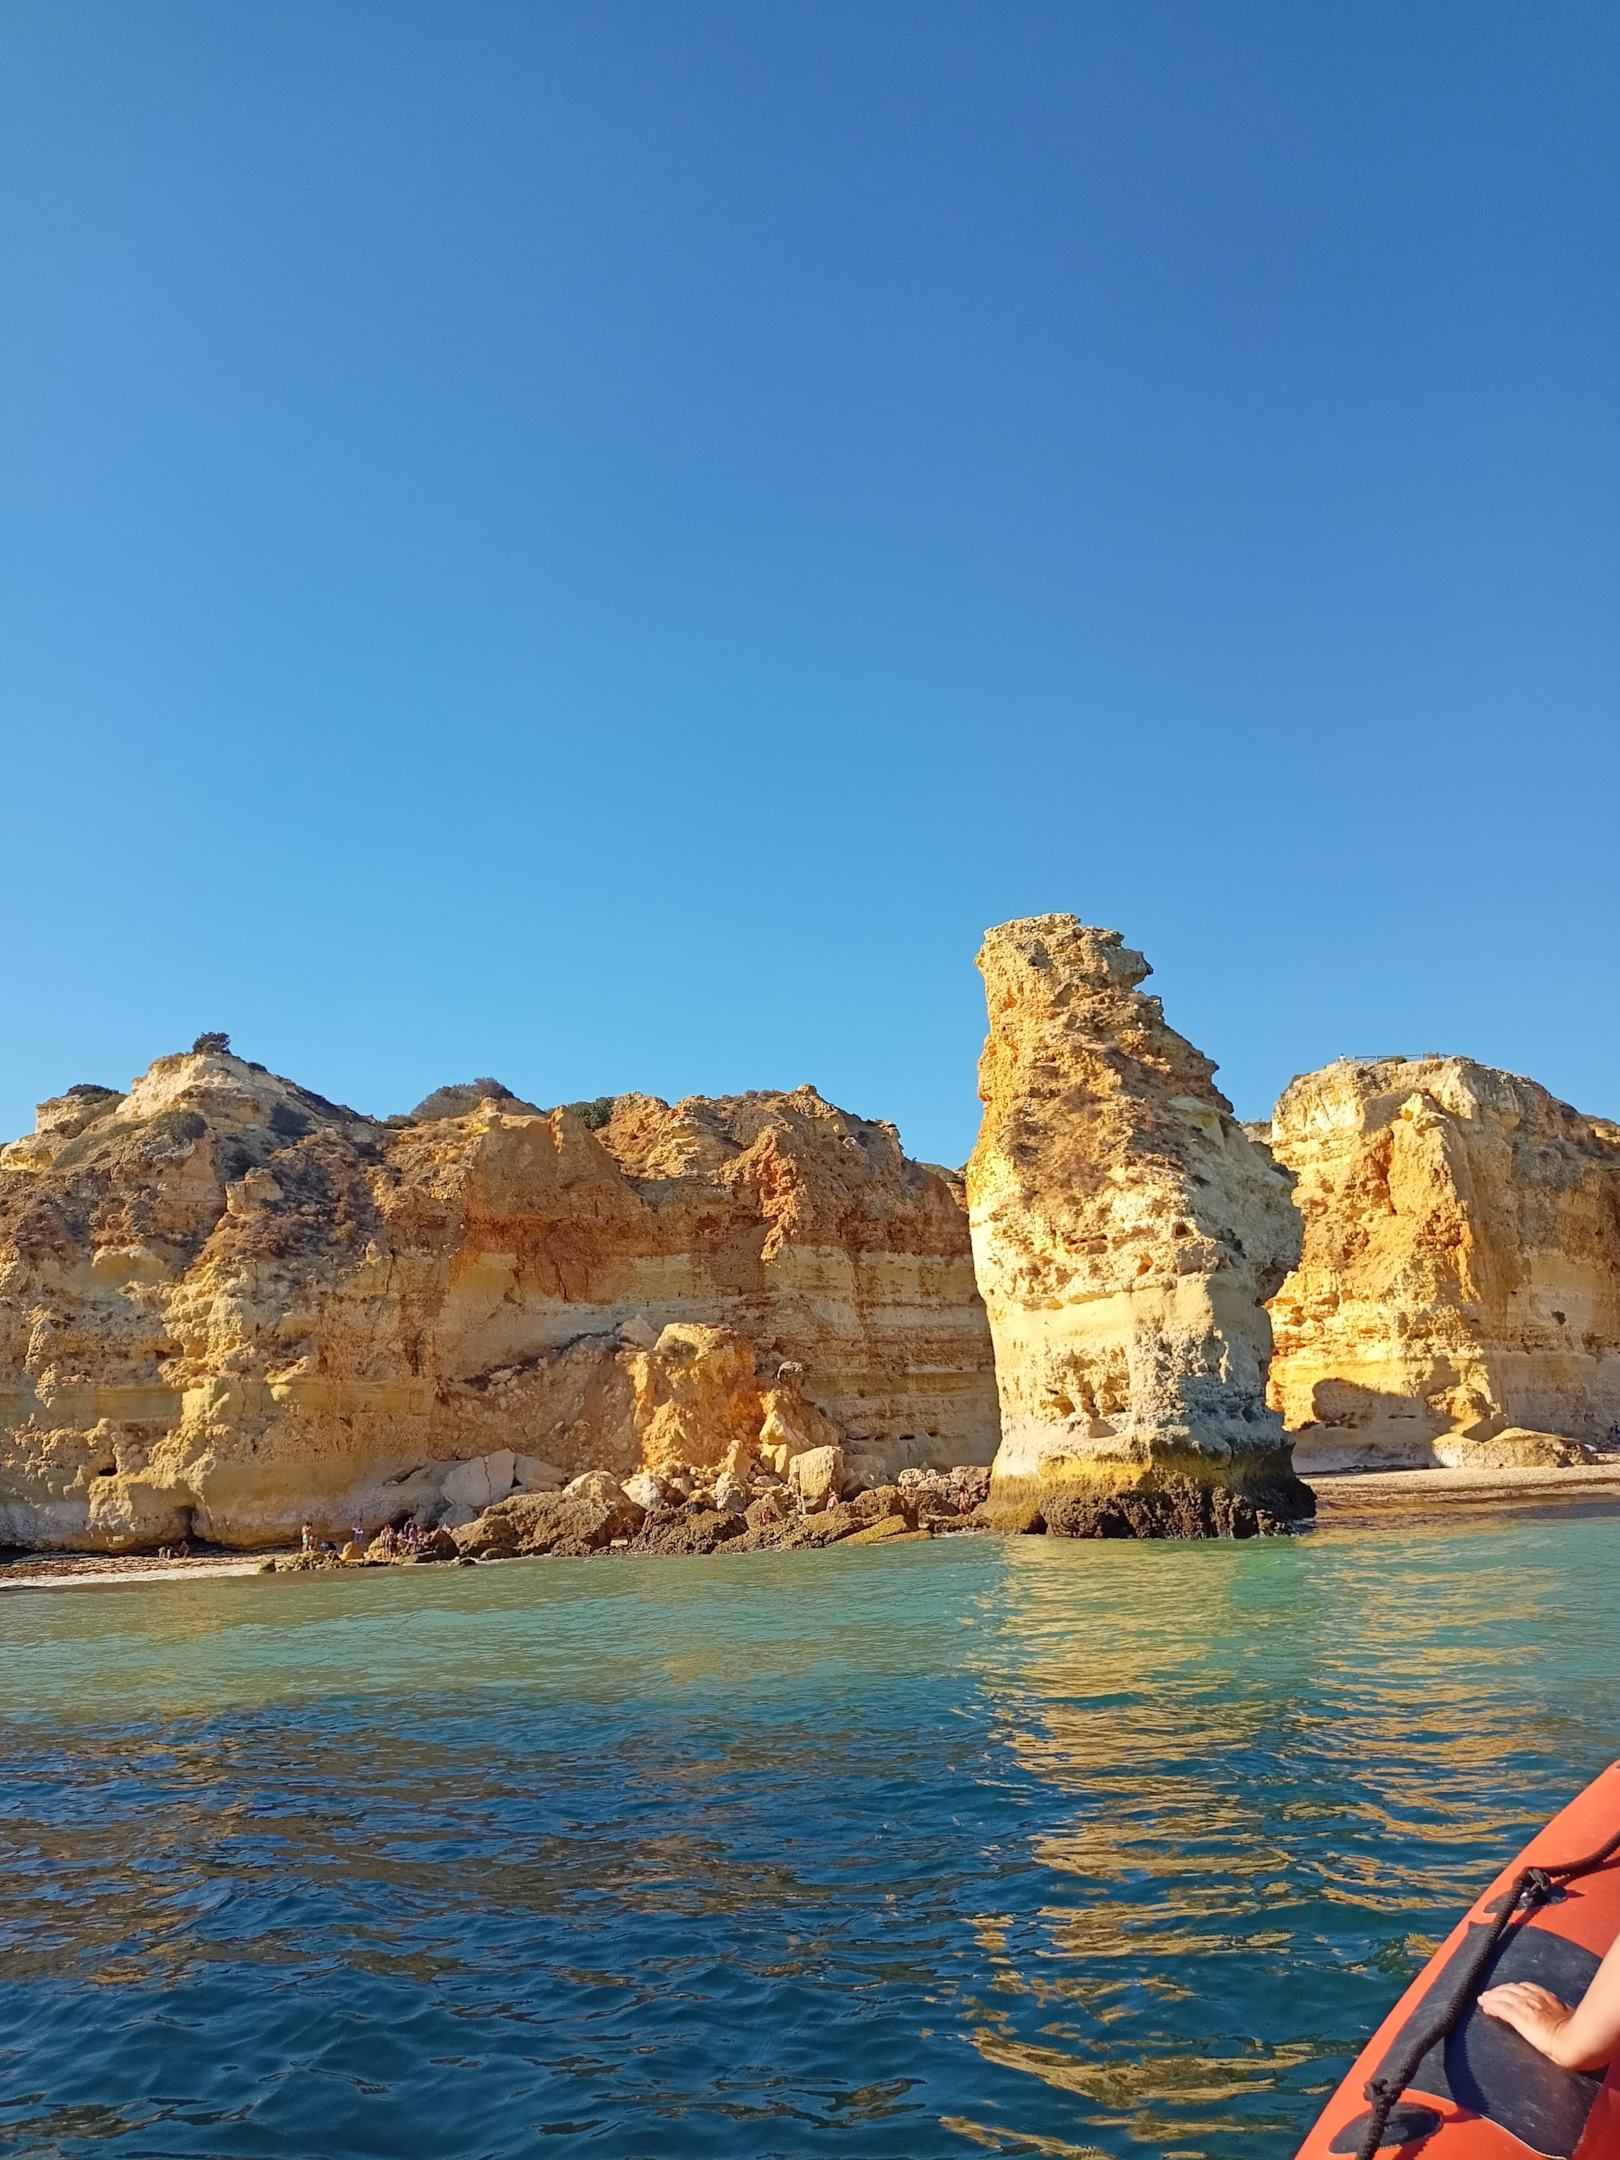 A winter holiday in Algarve with beautiful beaches and unforgettable memories